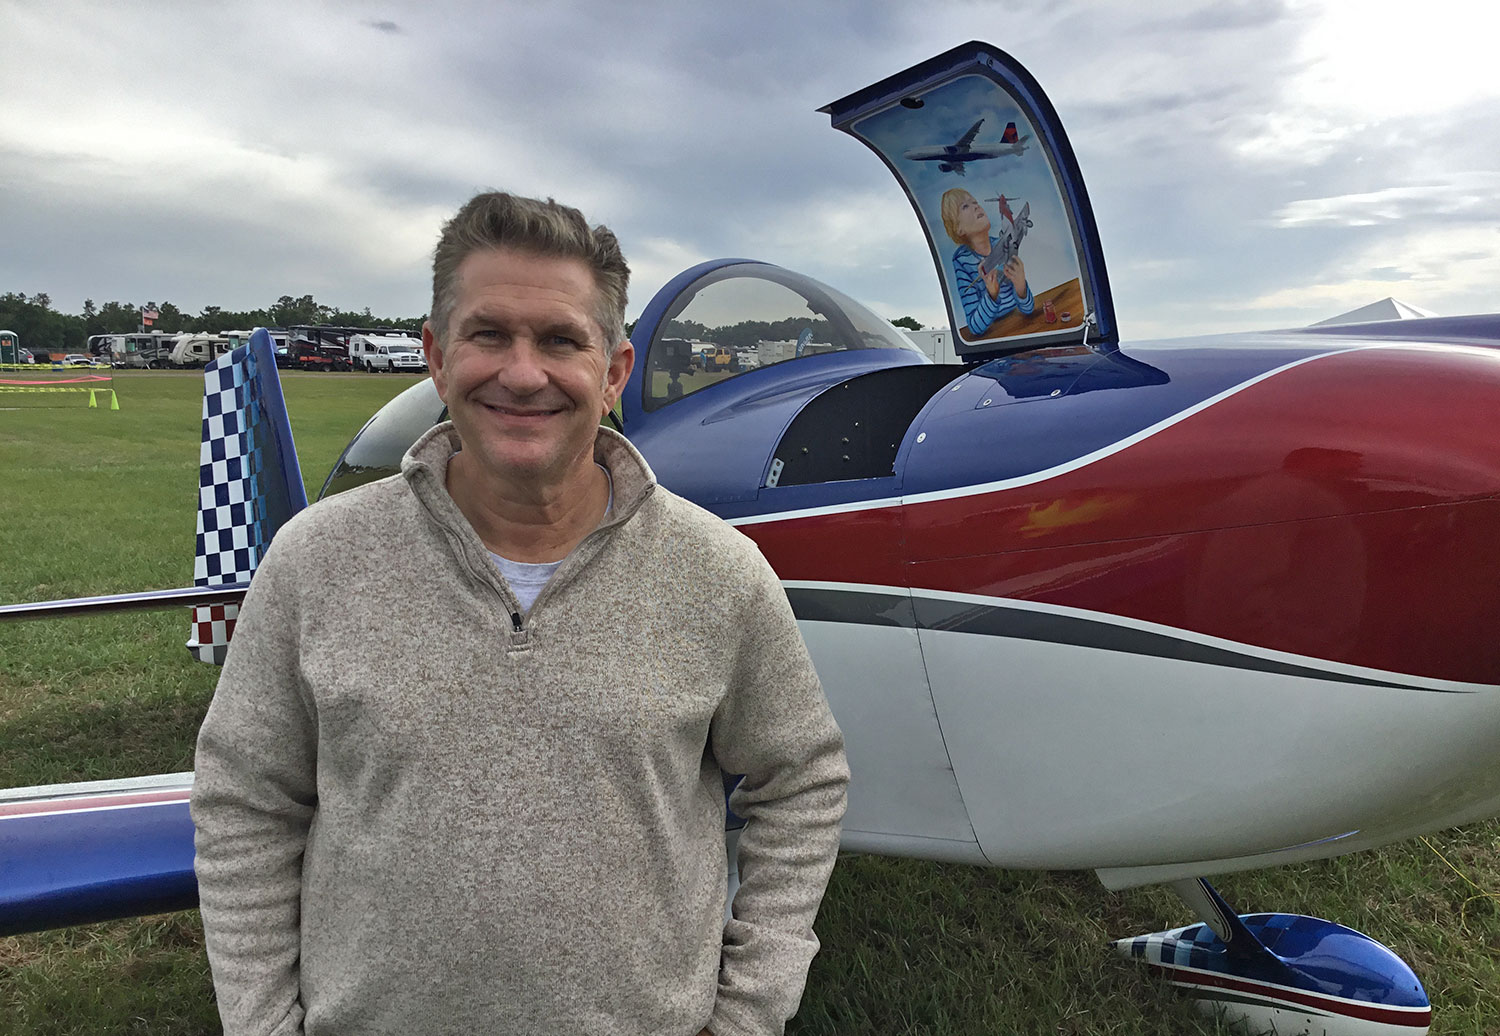 Andy Manila with his RV-8.